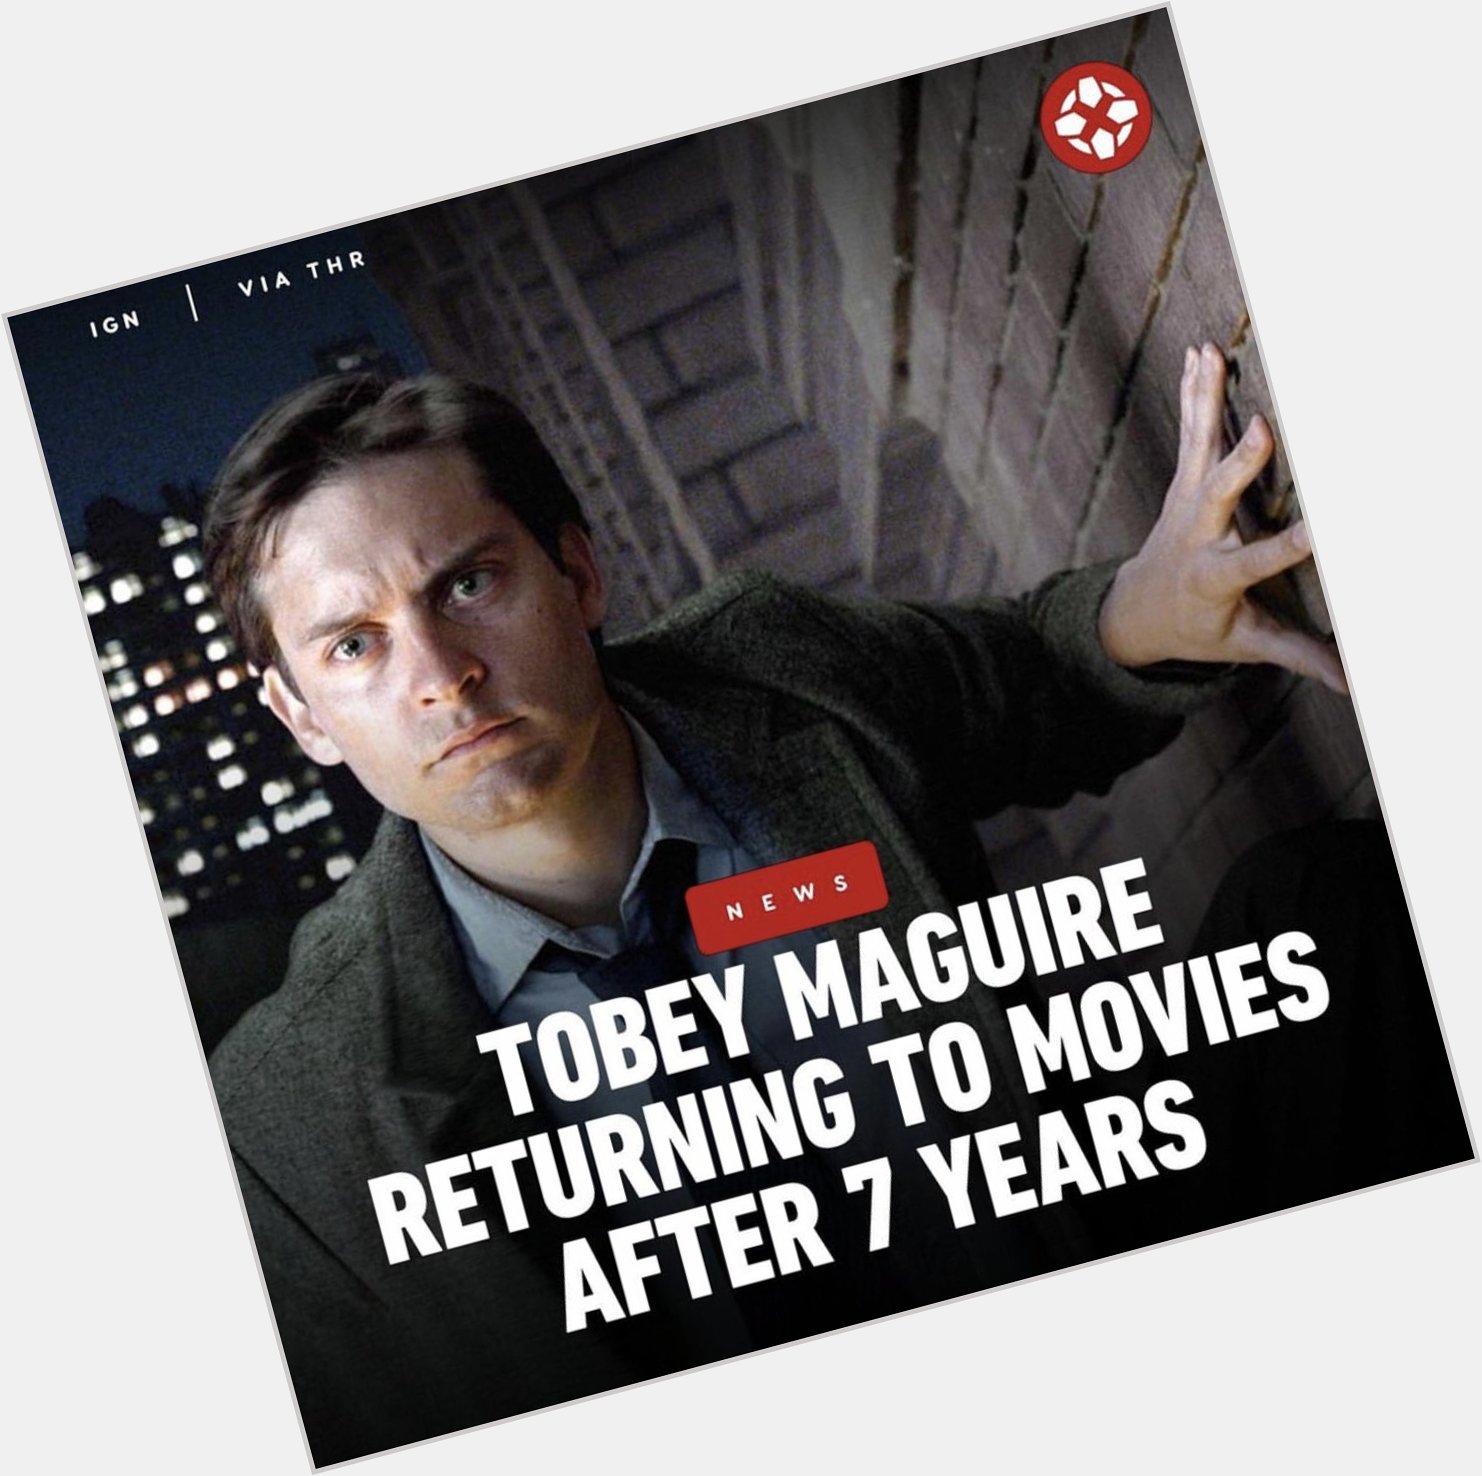 Happy Tobey Maguire s birthday to everyone!! 